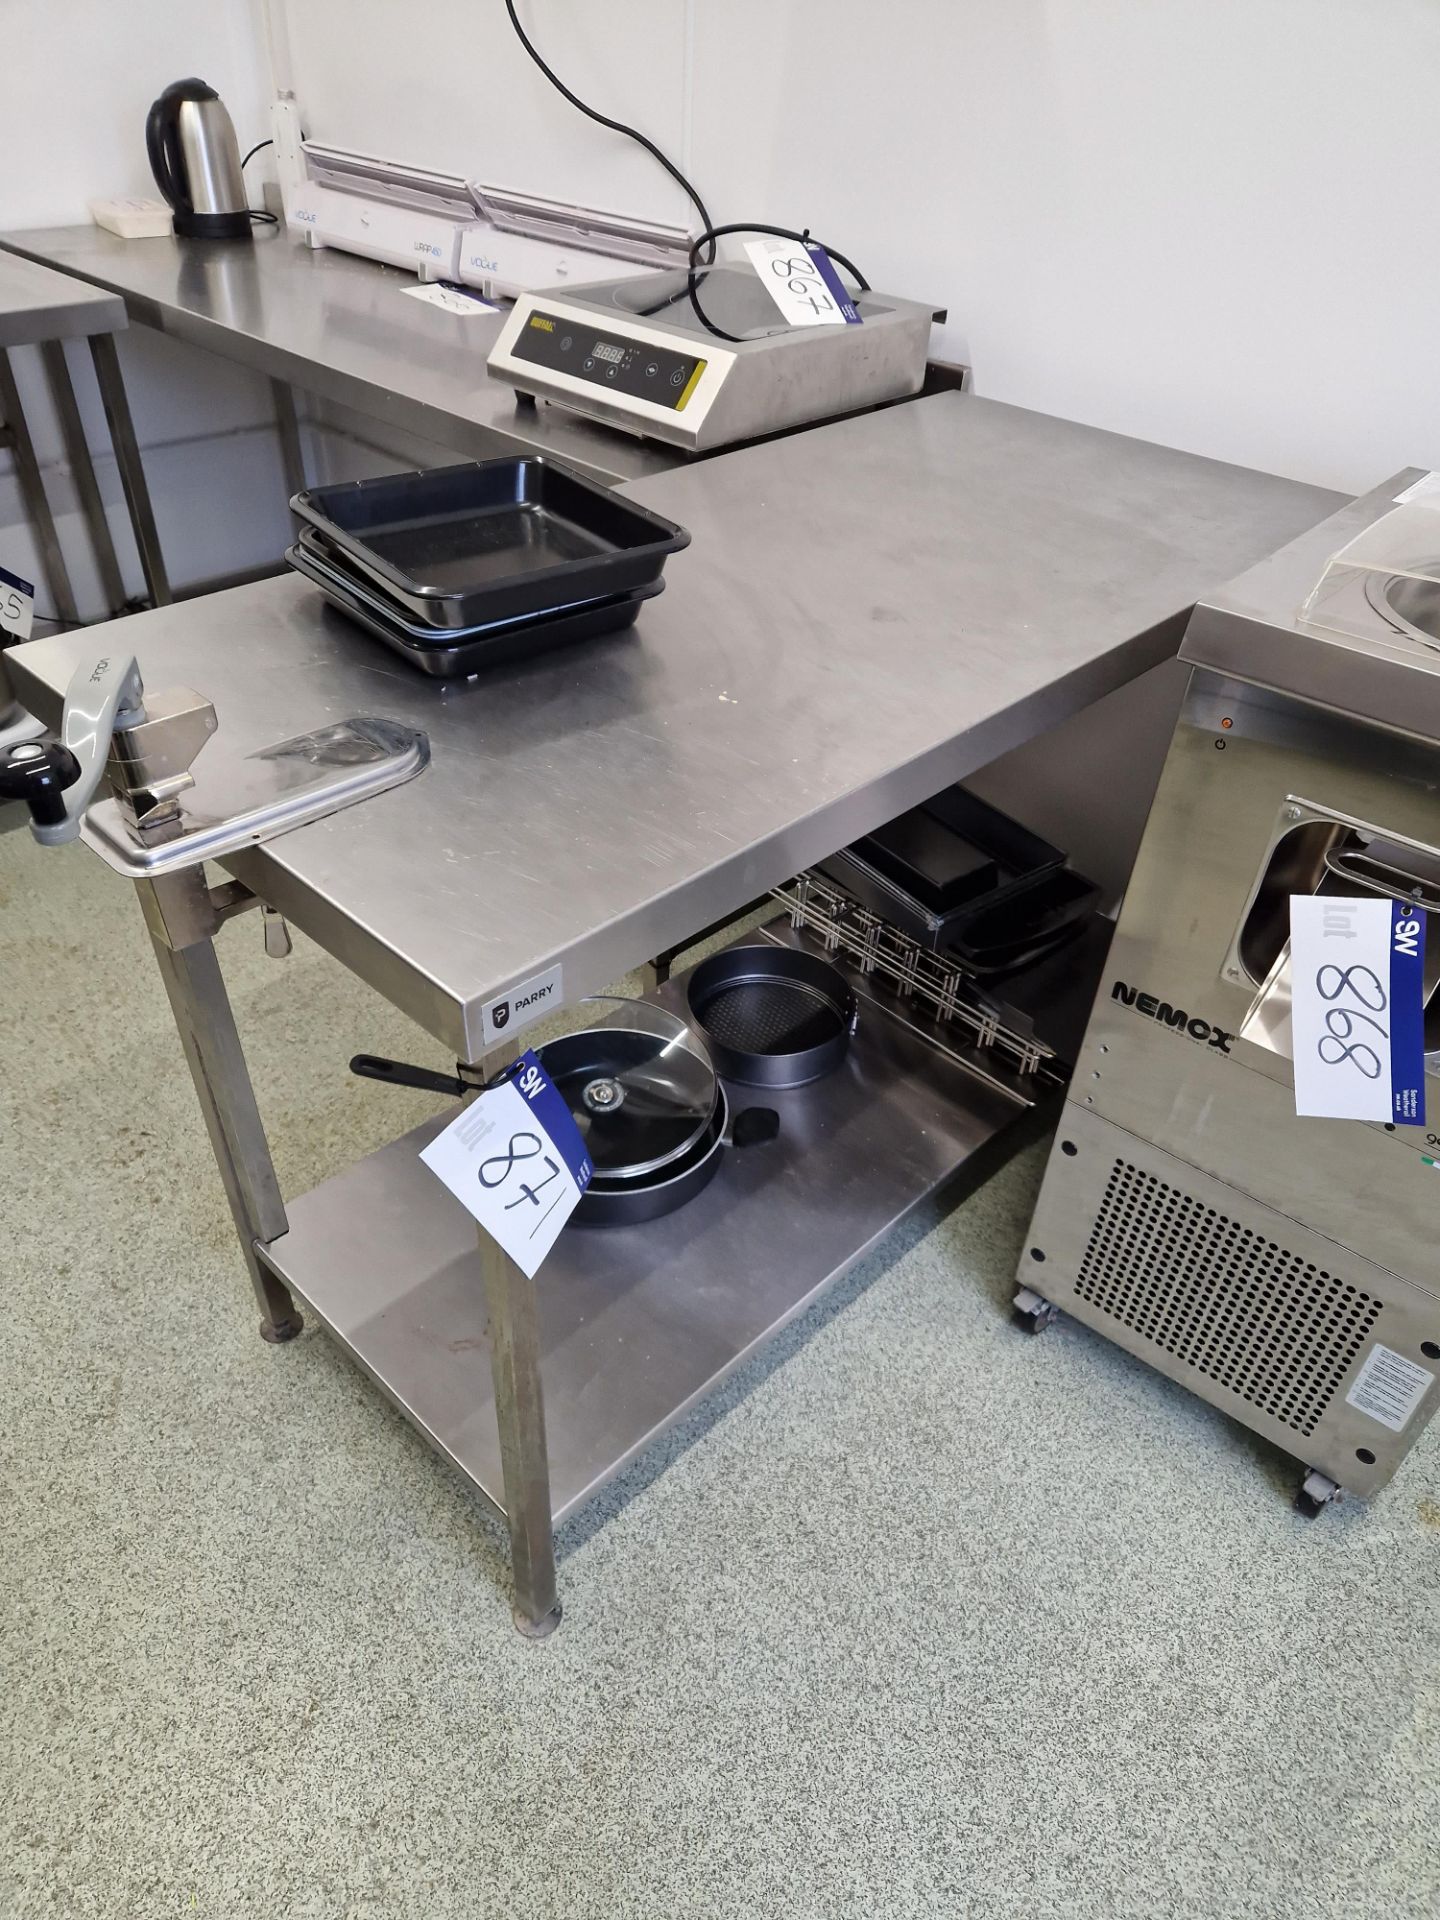 Parry Stainless Steel Preparation Table with Vogue Can Opener (Lot subject to approval from